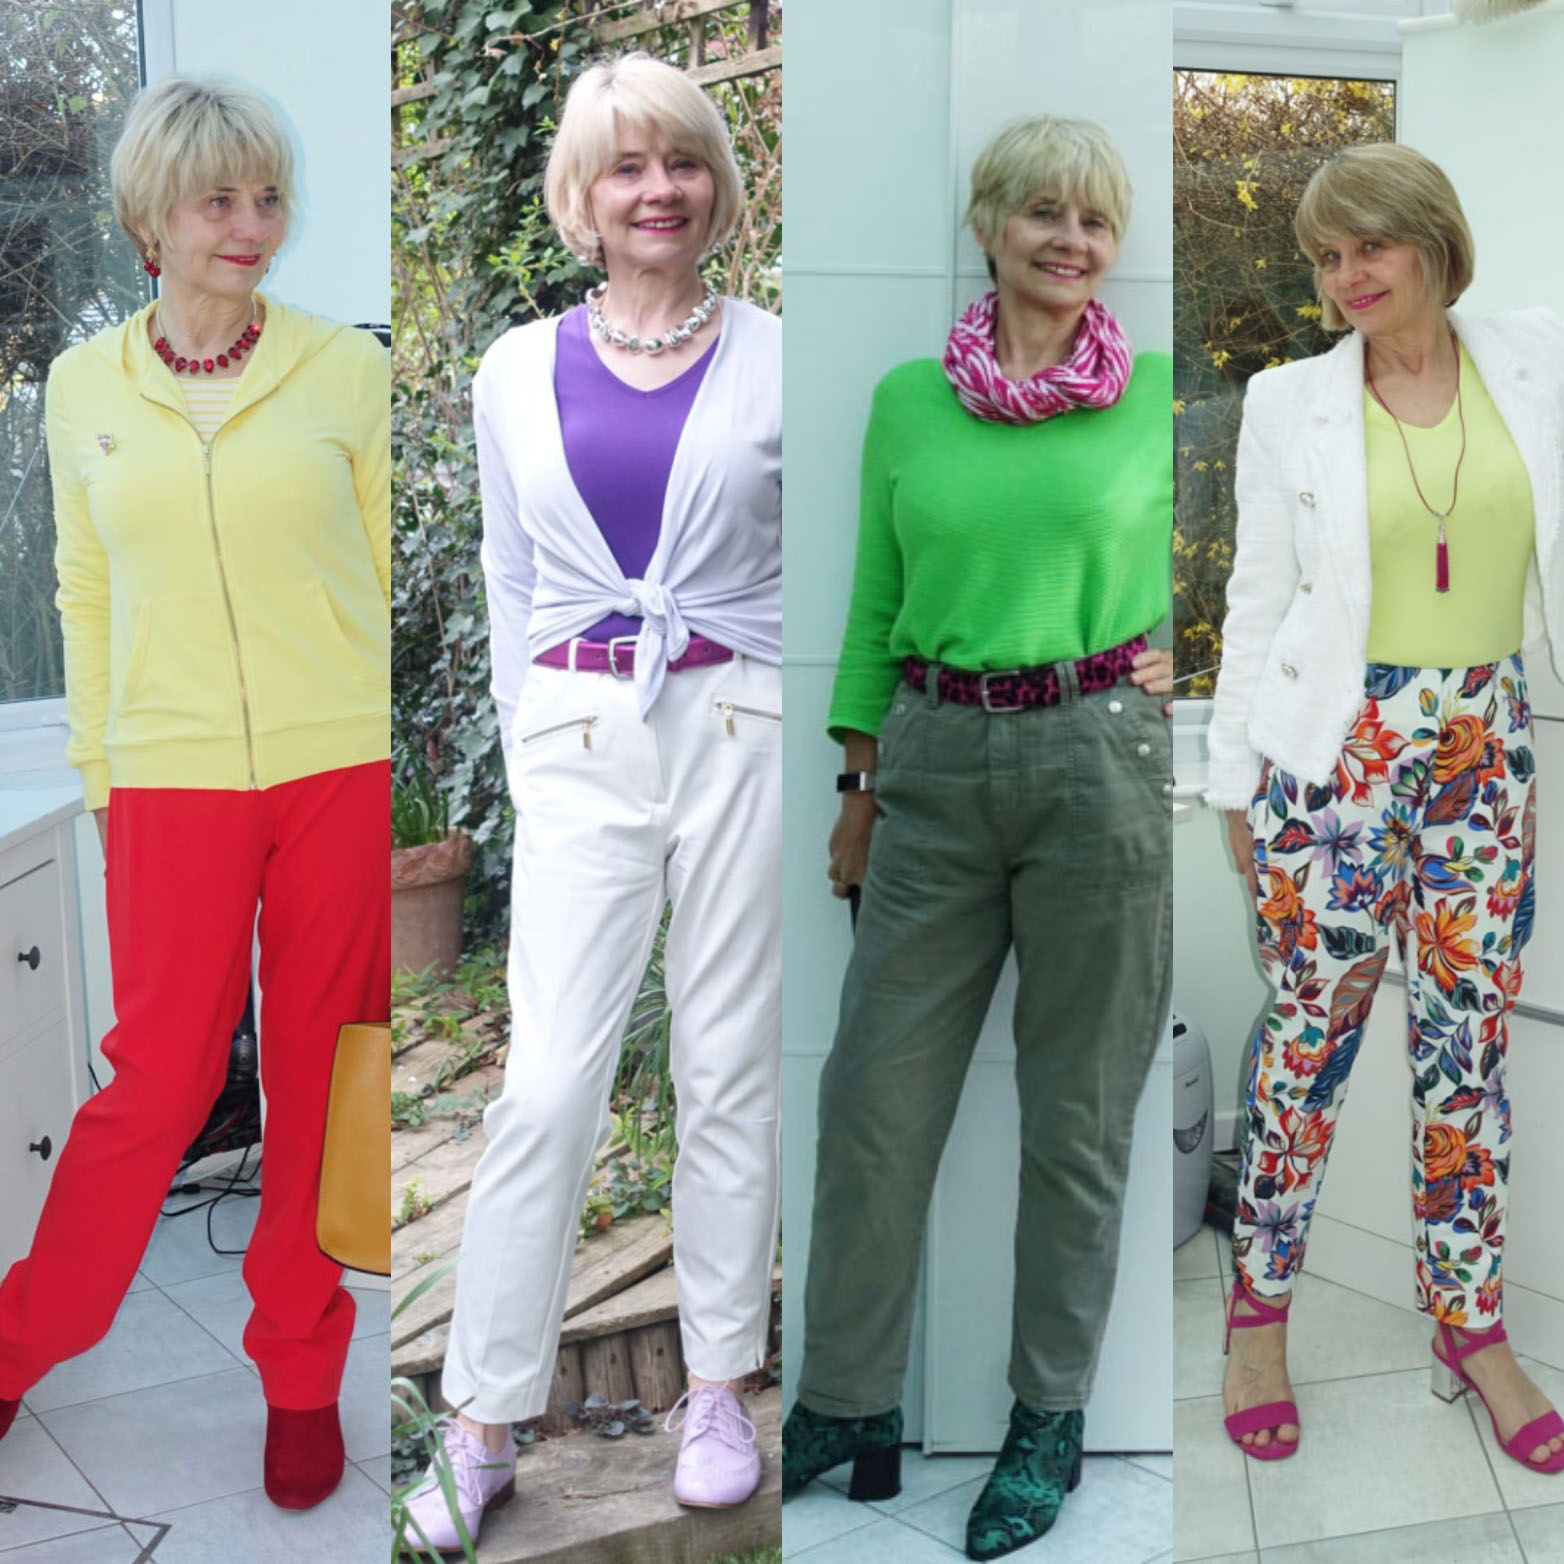 Images showing Gail Hanlon from Is This Mutton in trouser styles which don't suit her